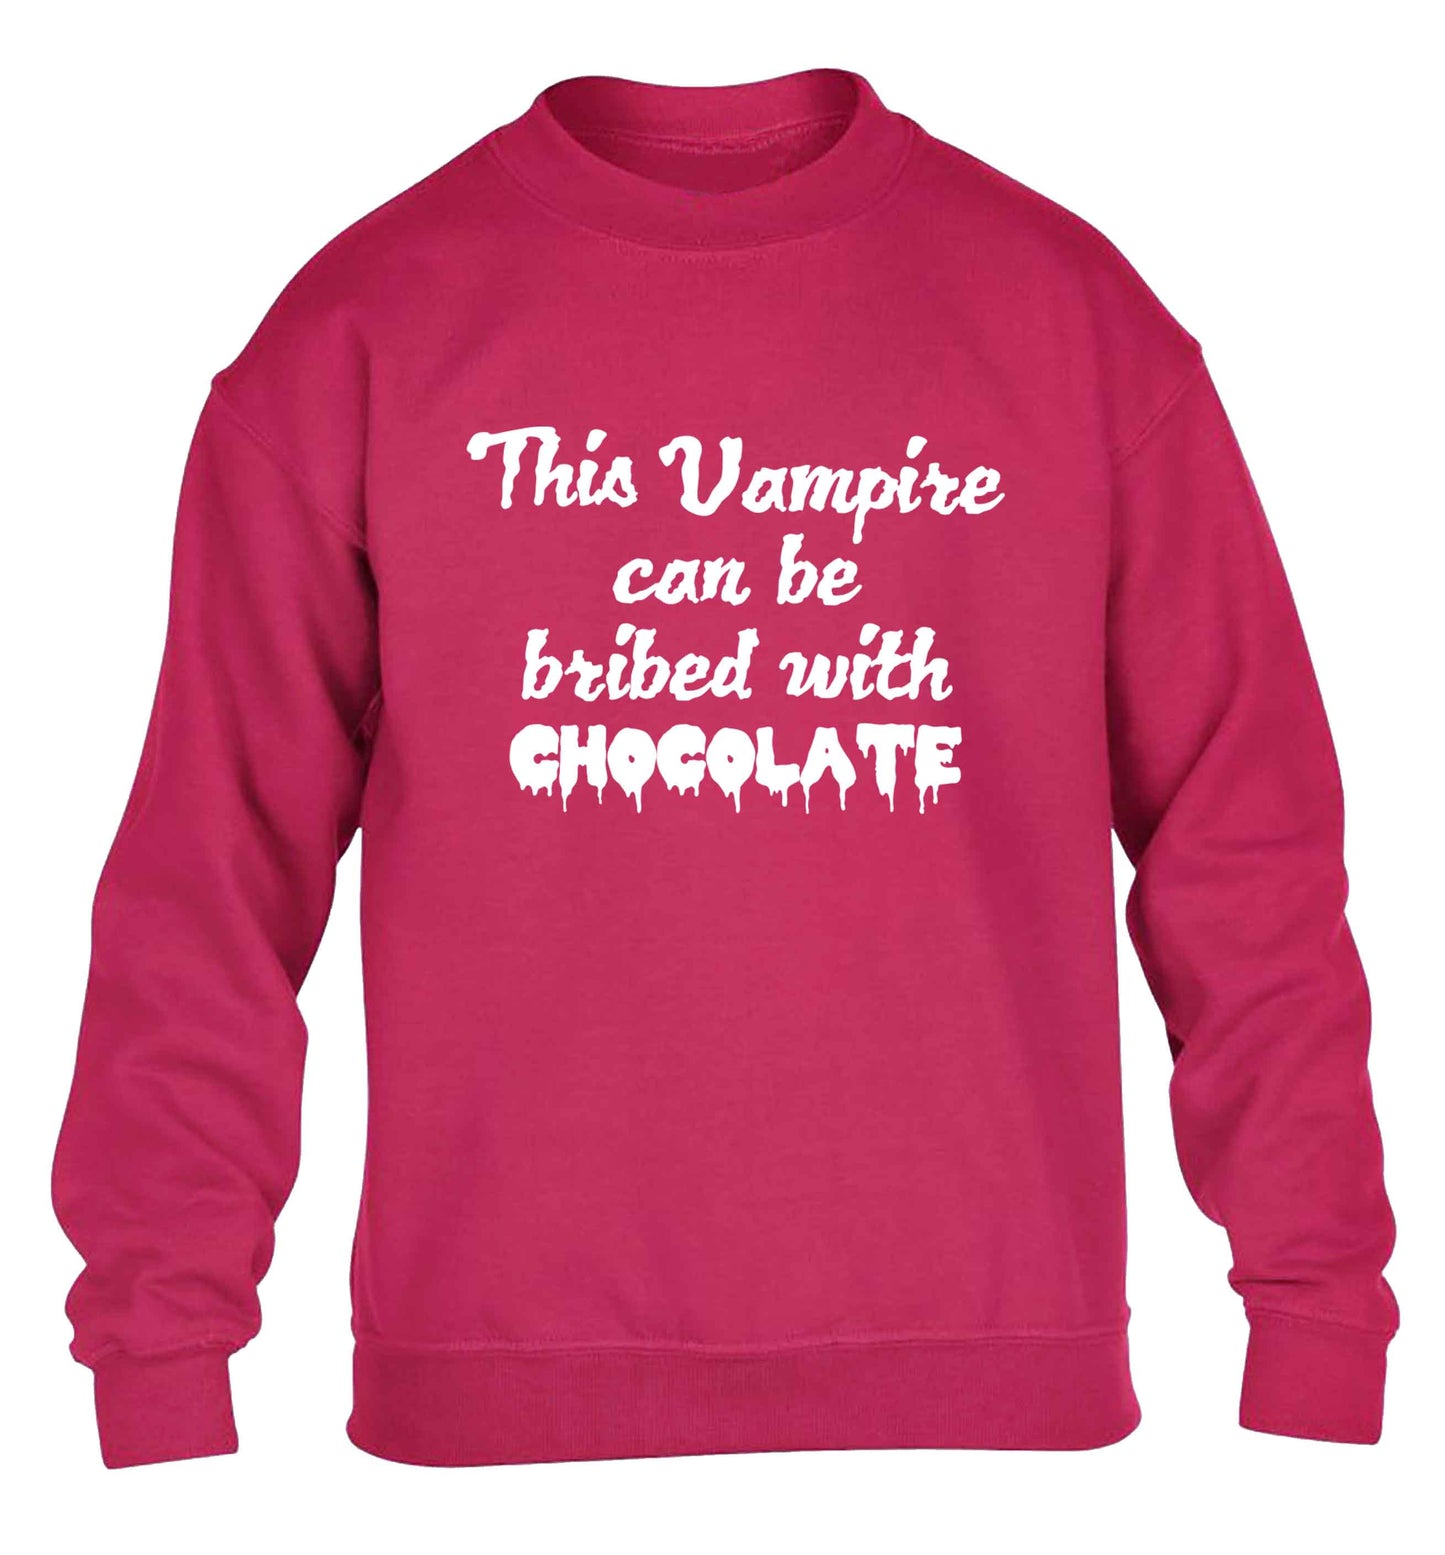 This vampire can be bribed with chocolate children's pink sweater 12-13 Years